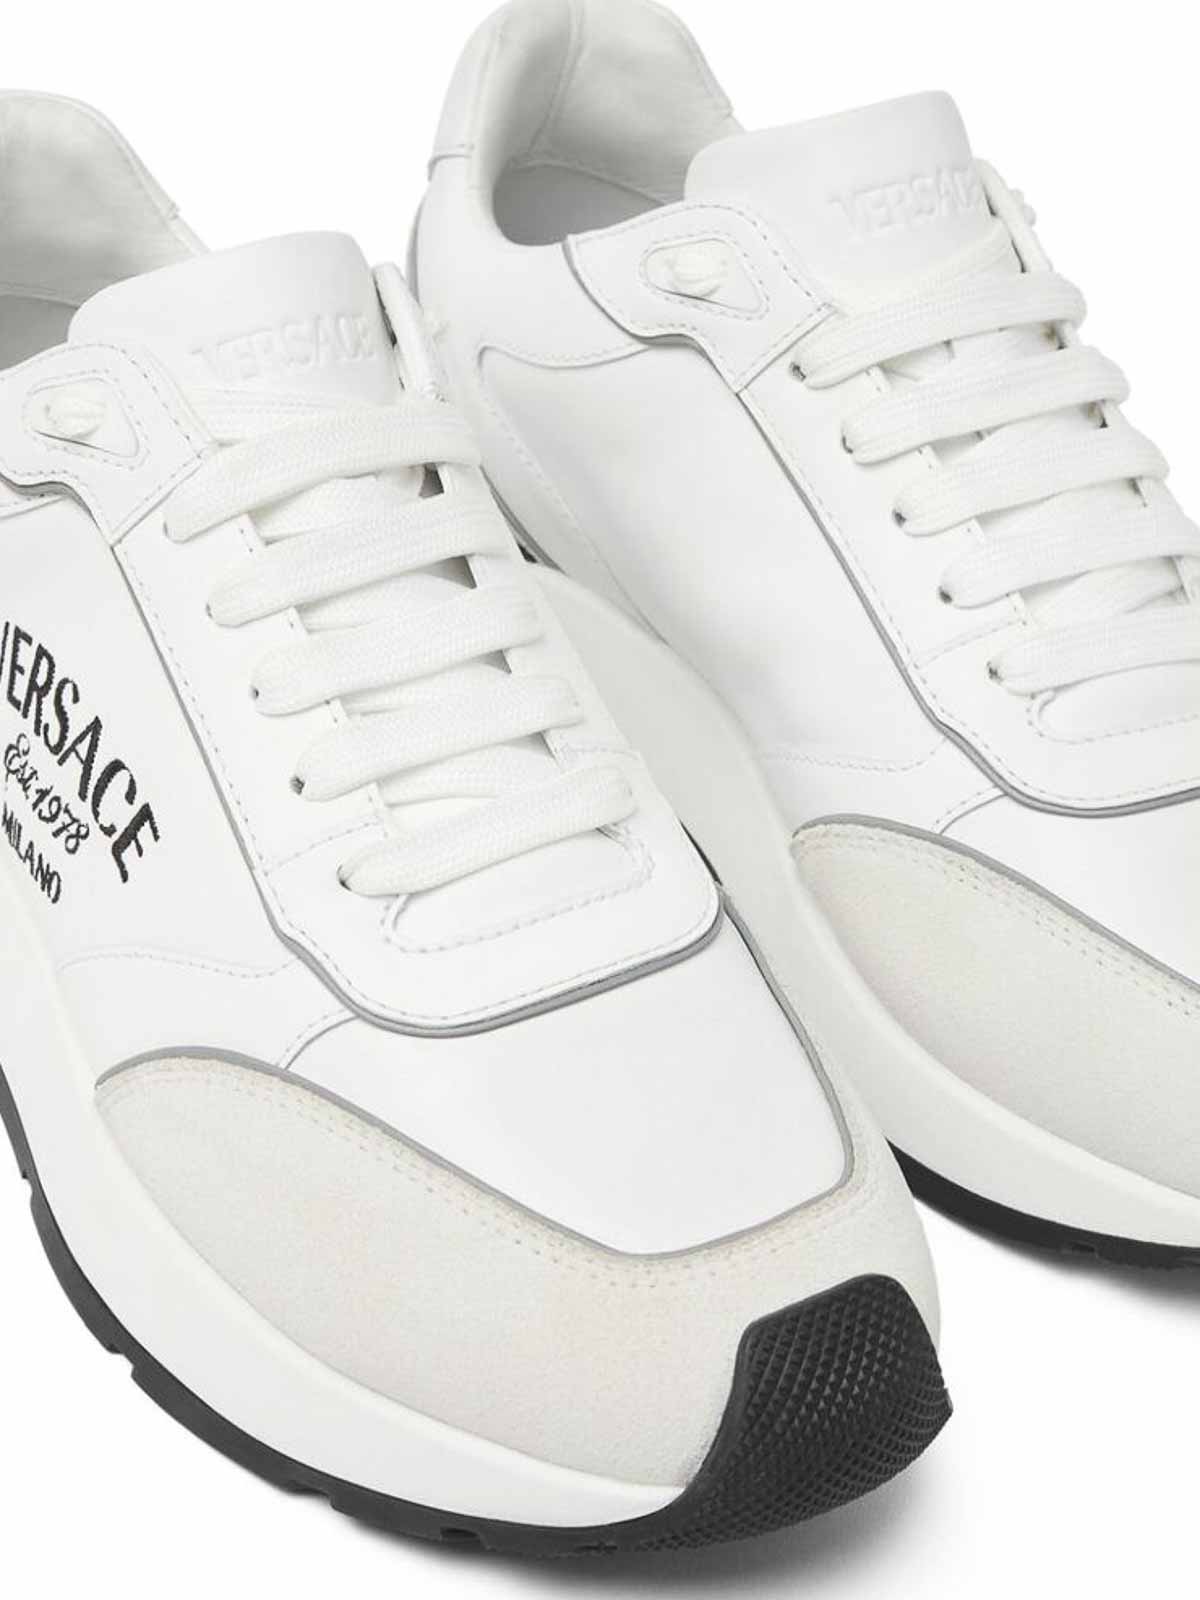 Shop Versace White Logo Lace-up Sneakers